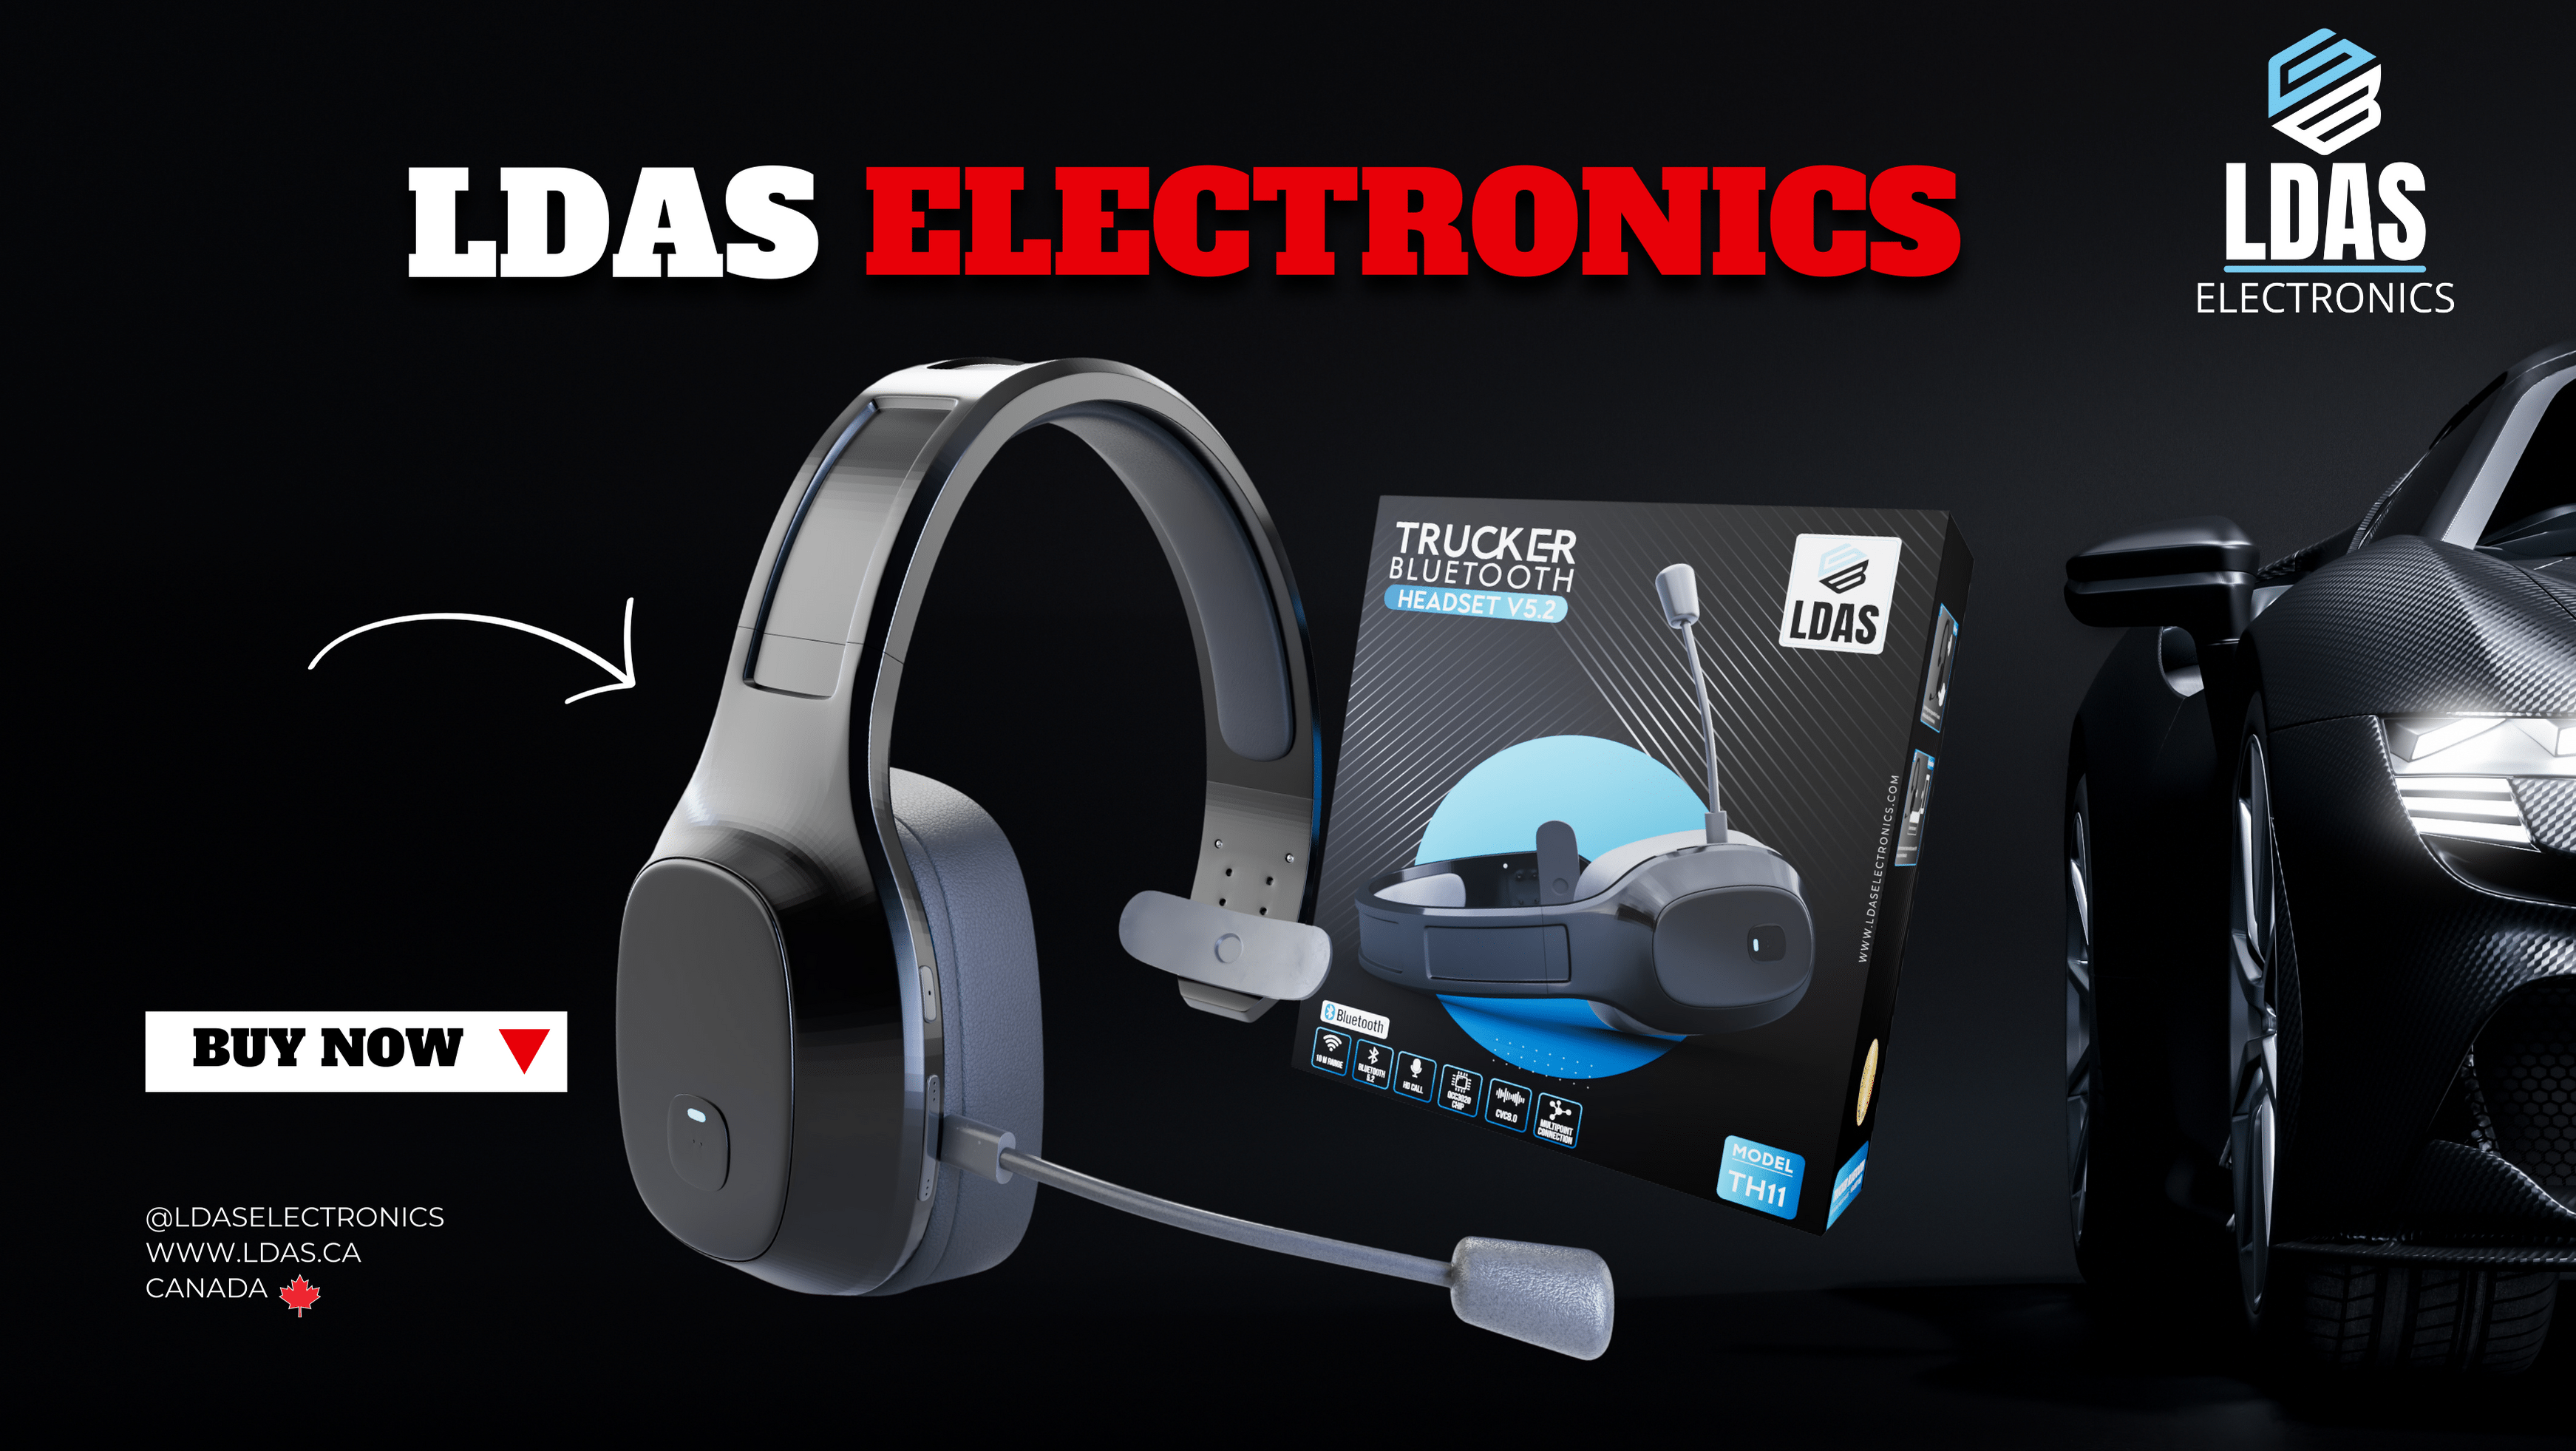 The Best One Ear Headset for Optimal Work Productivity - LDAS ELECTRONICS